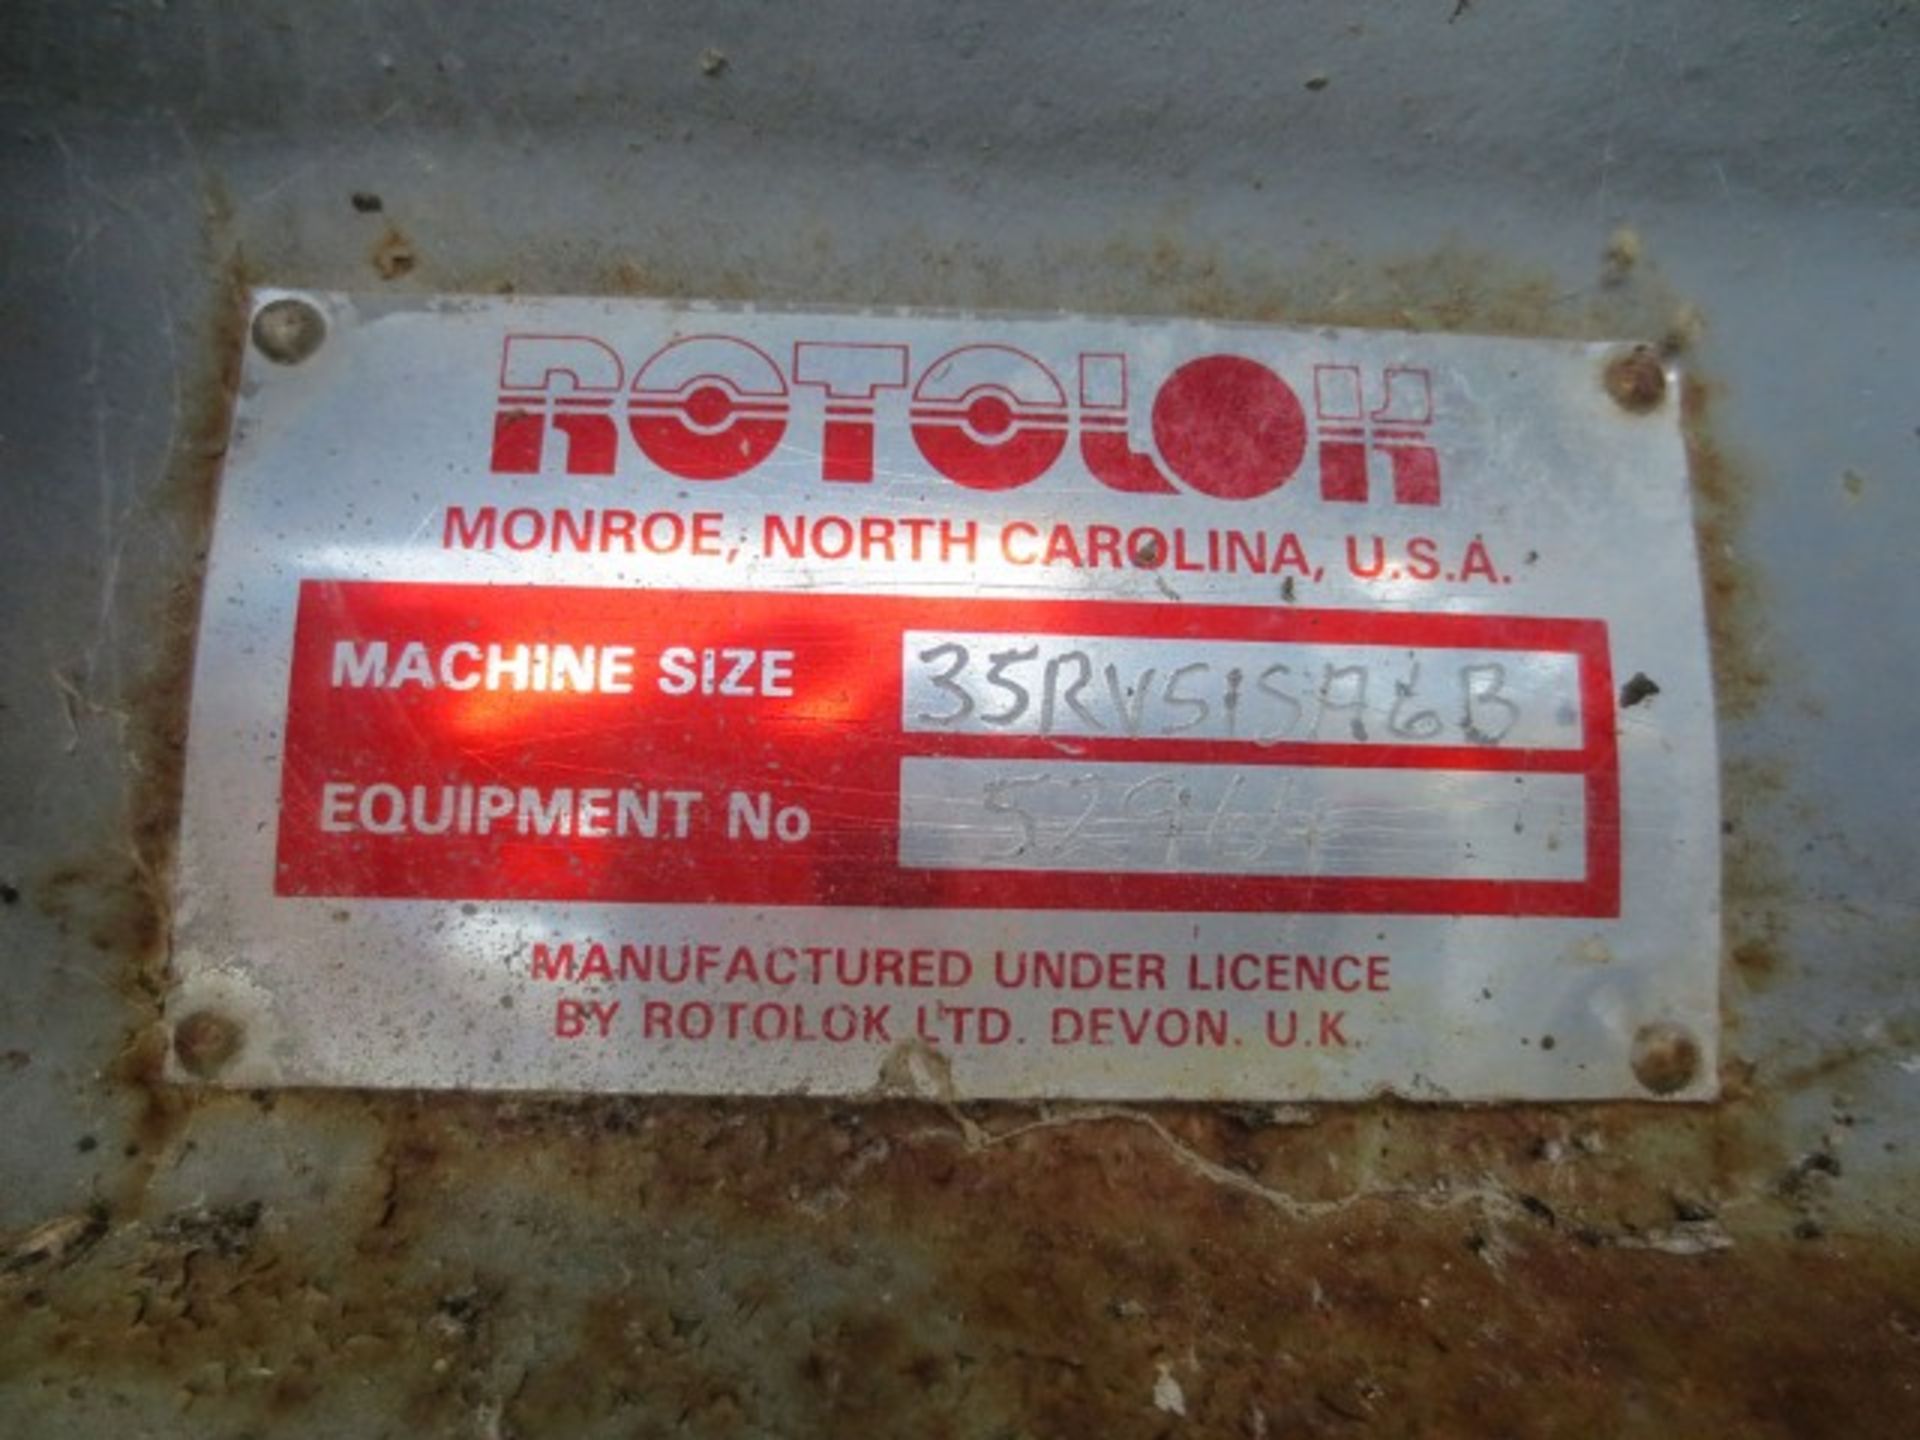 Lot Sold Conditionally. Part of Bulk Bid. Rotary motor driven airlock valve by Rotolok. Size 14" x 1 - Image 4 of 5